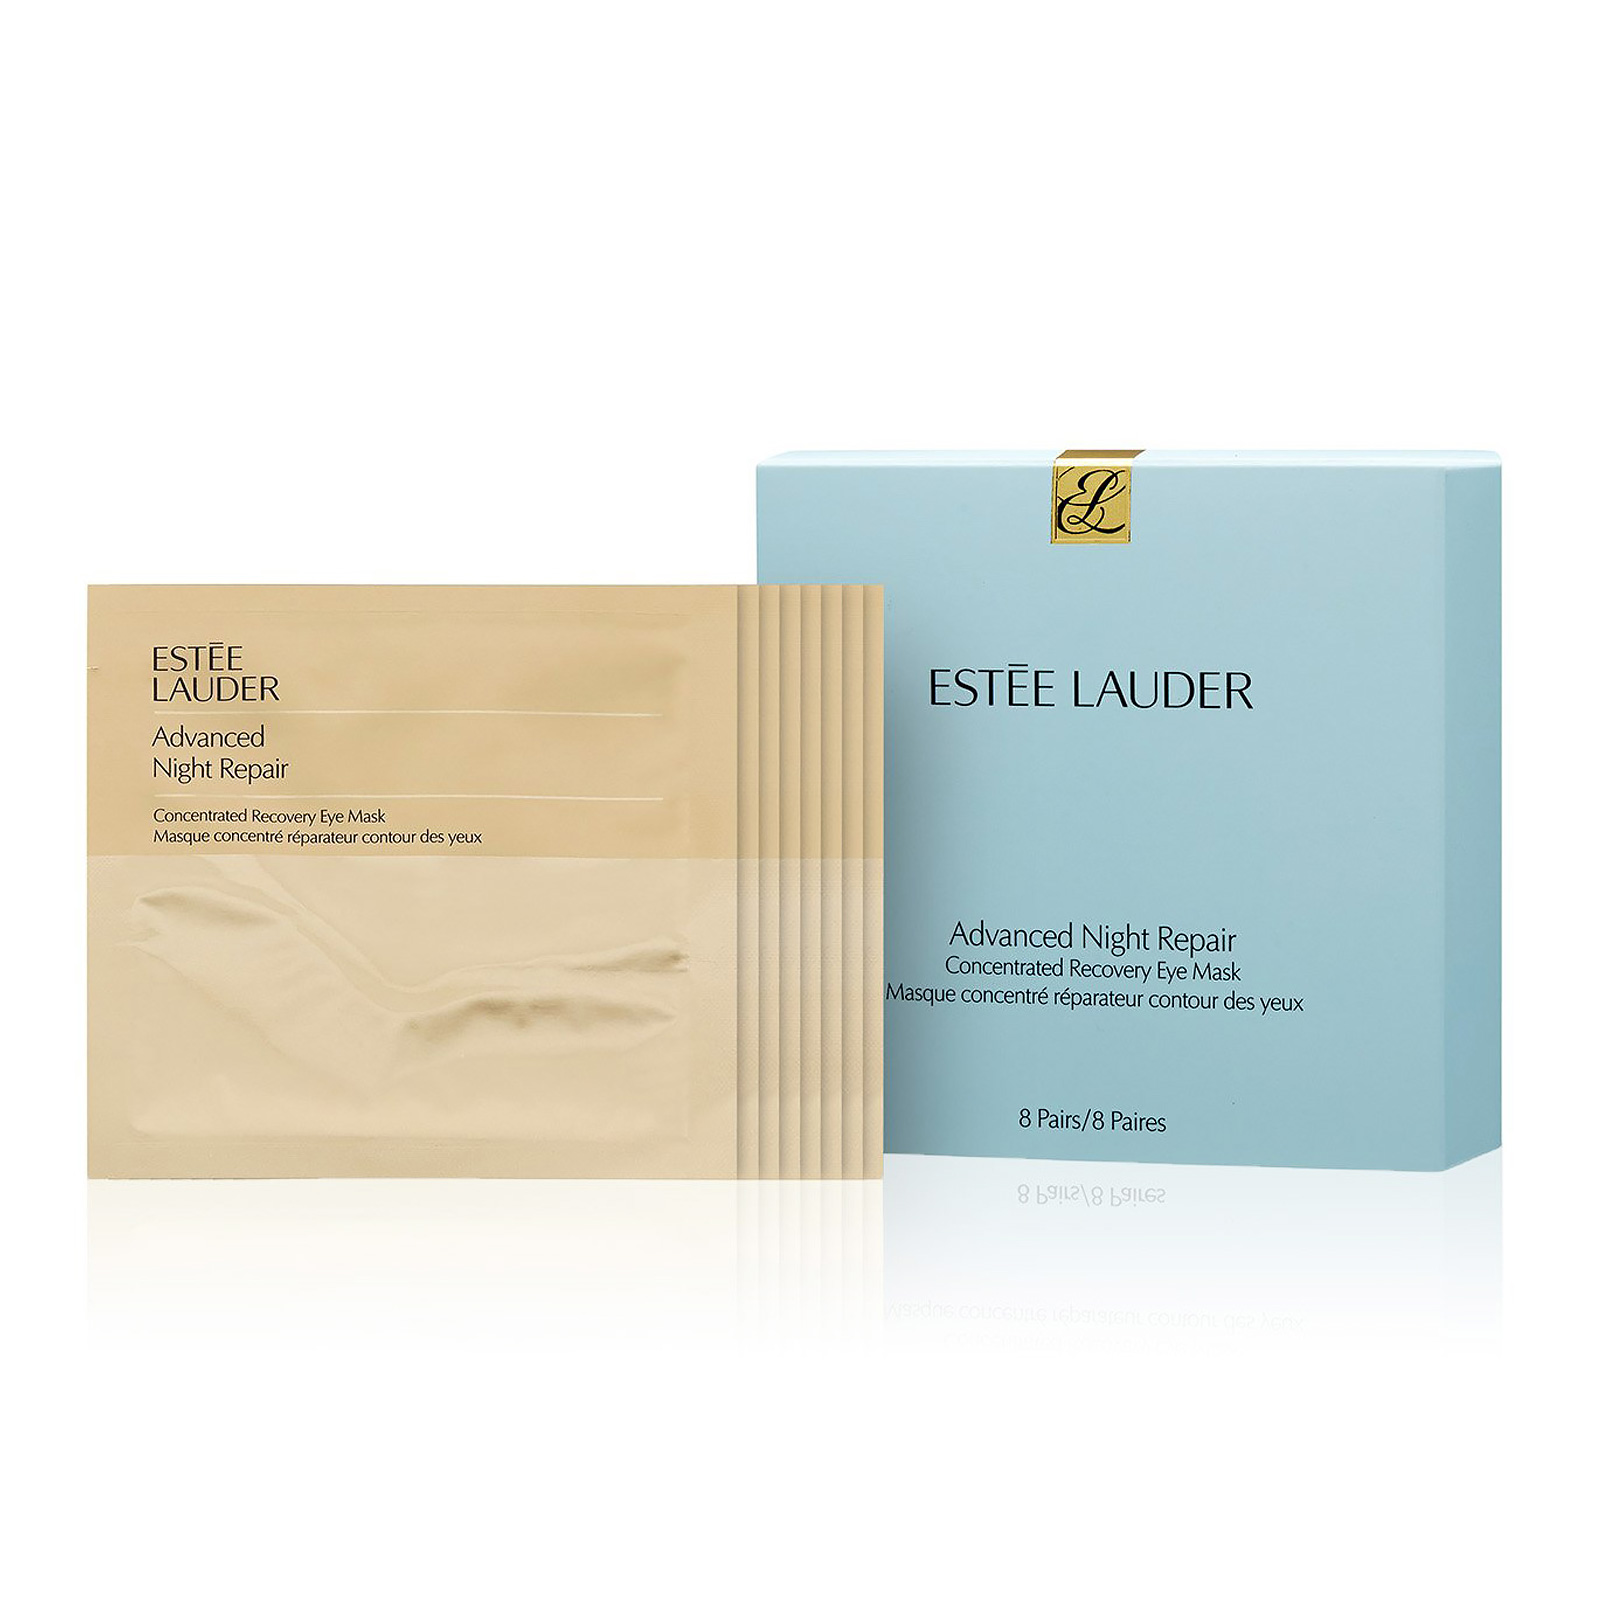 Estée Lauder Advanced Repair Concentrated Recovery Eye Mask1 box 8 AKB